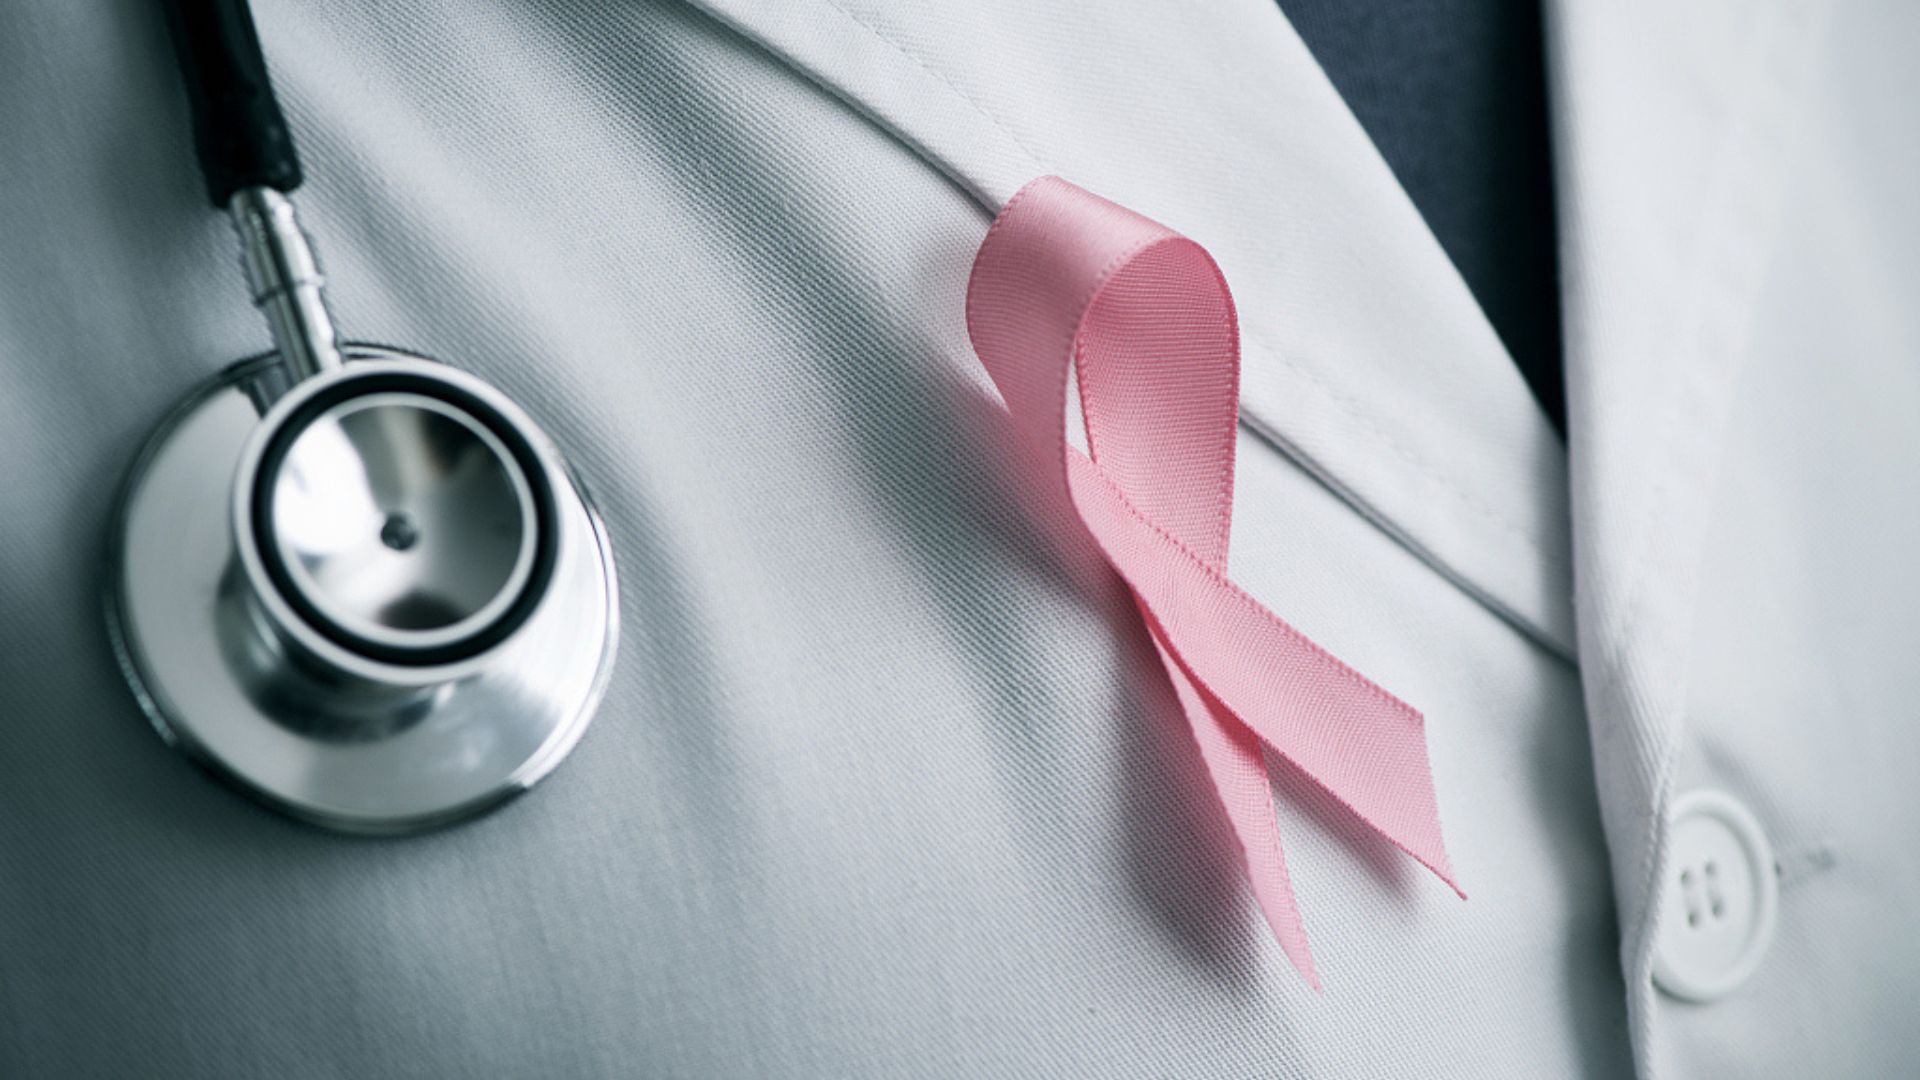 A pink ribbon for breast cancer. /nito100/Getty Creative via CFP